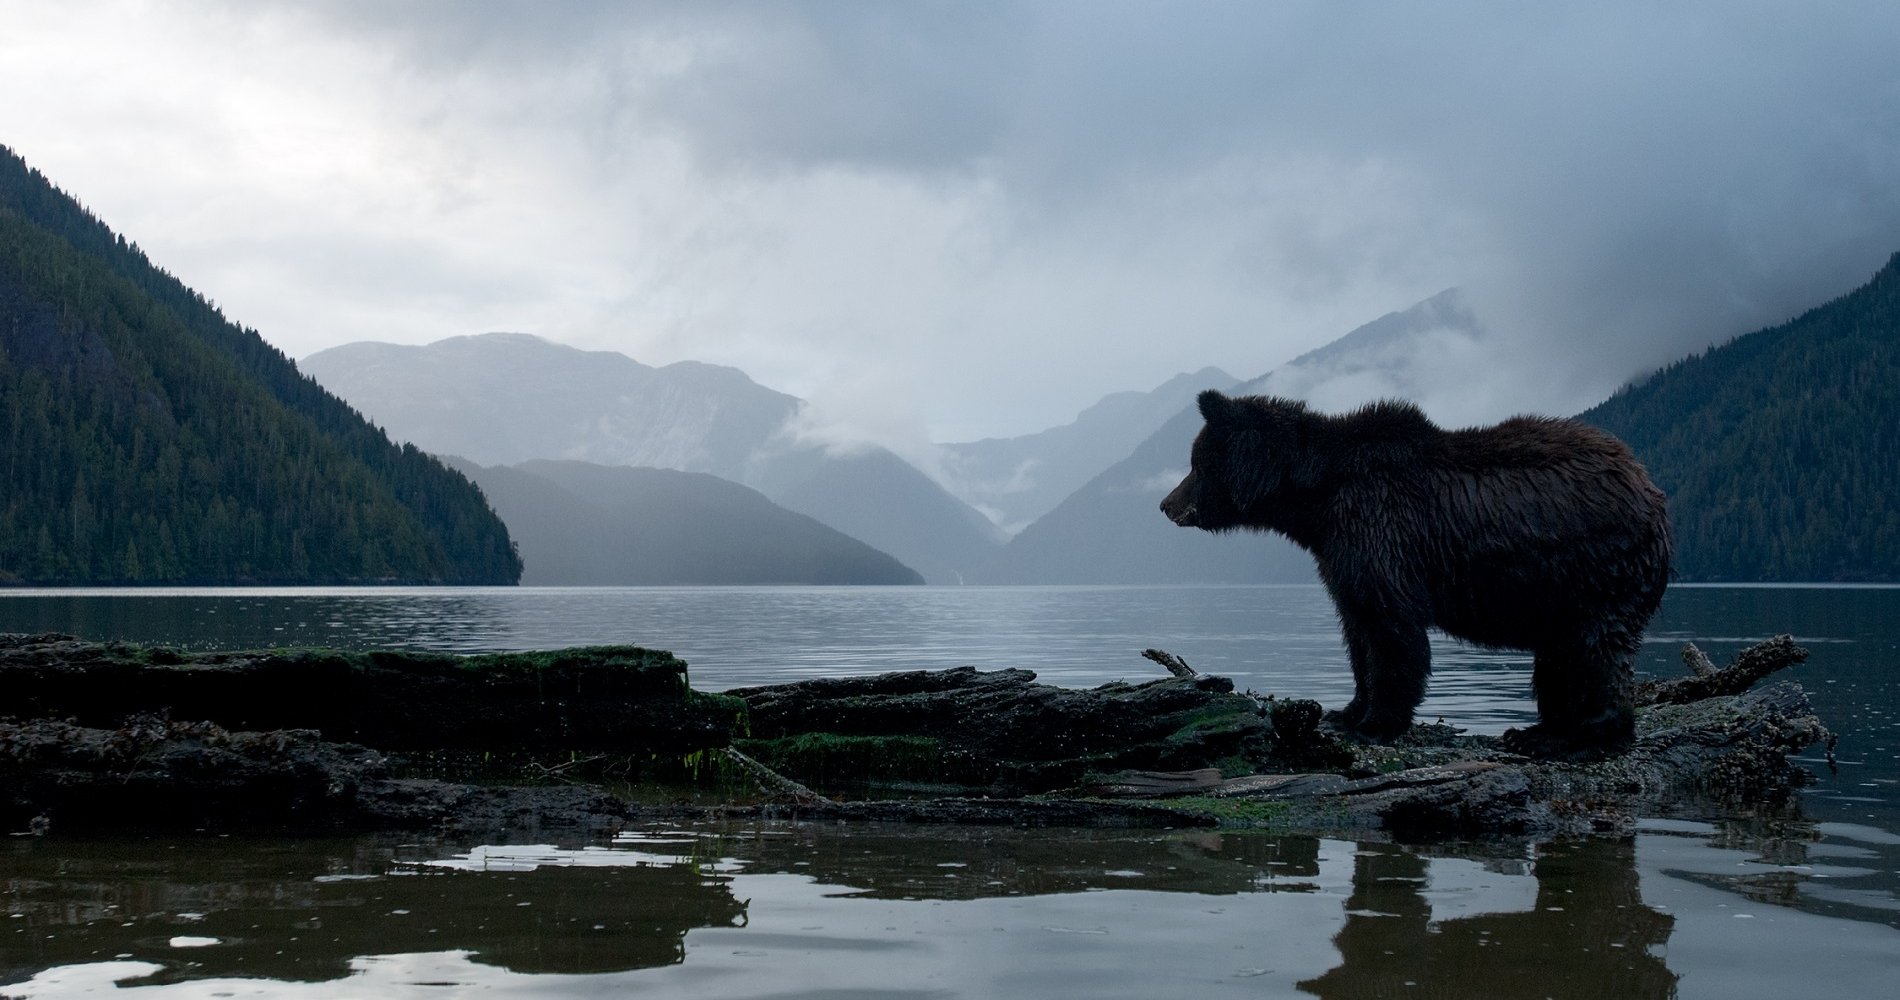 A grizzly bear stands on the shoreline